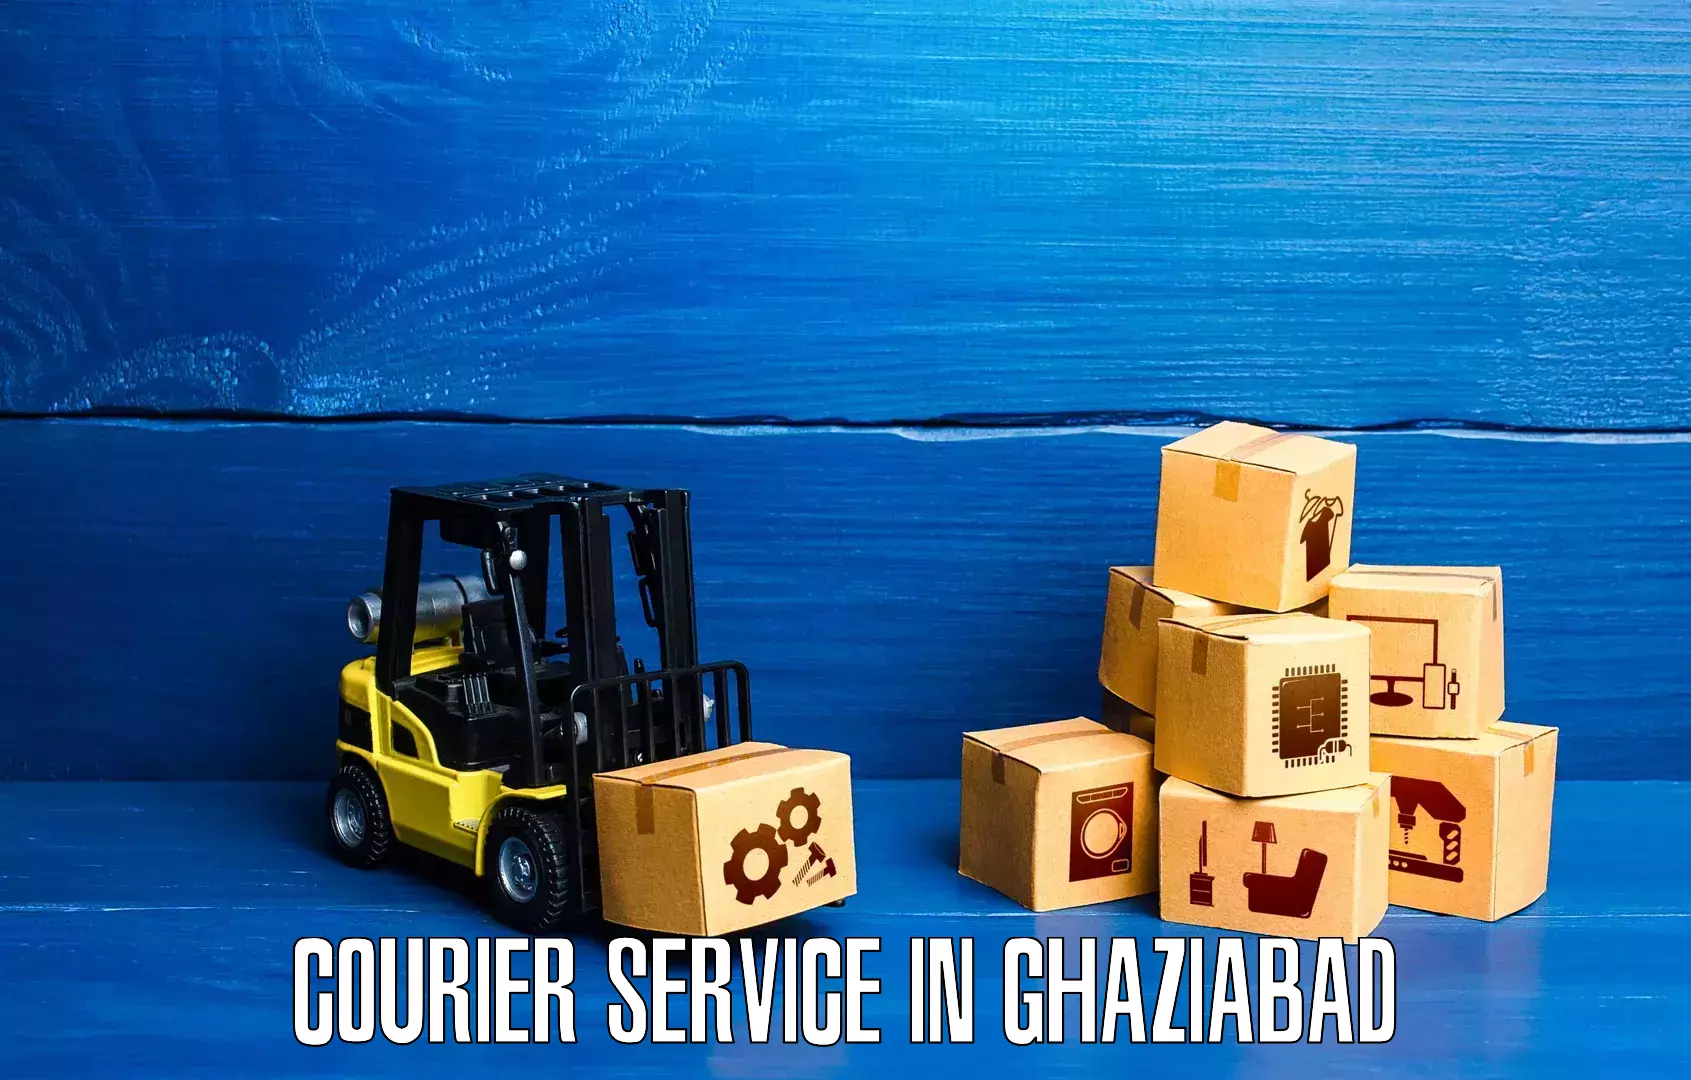 Fastest parcel delivery in Ghaziabad